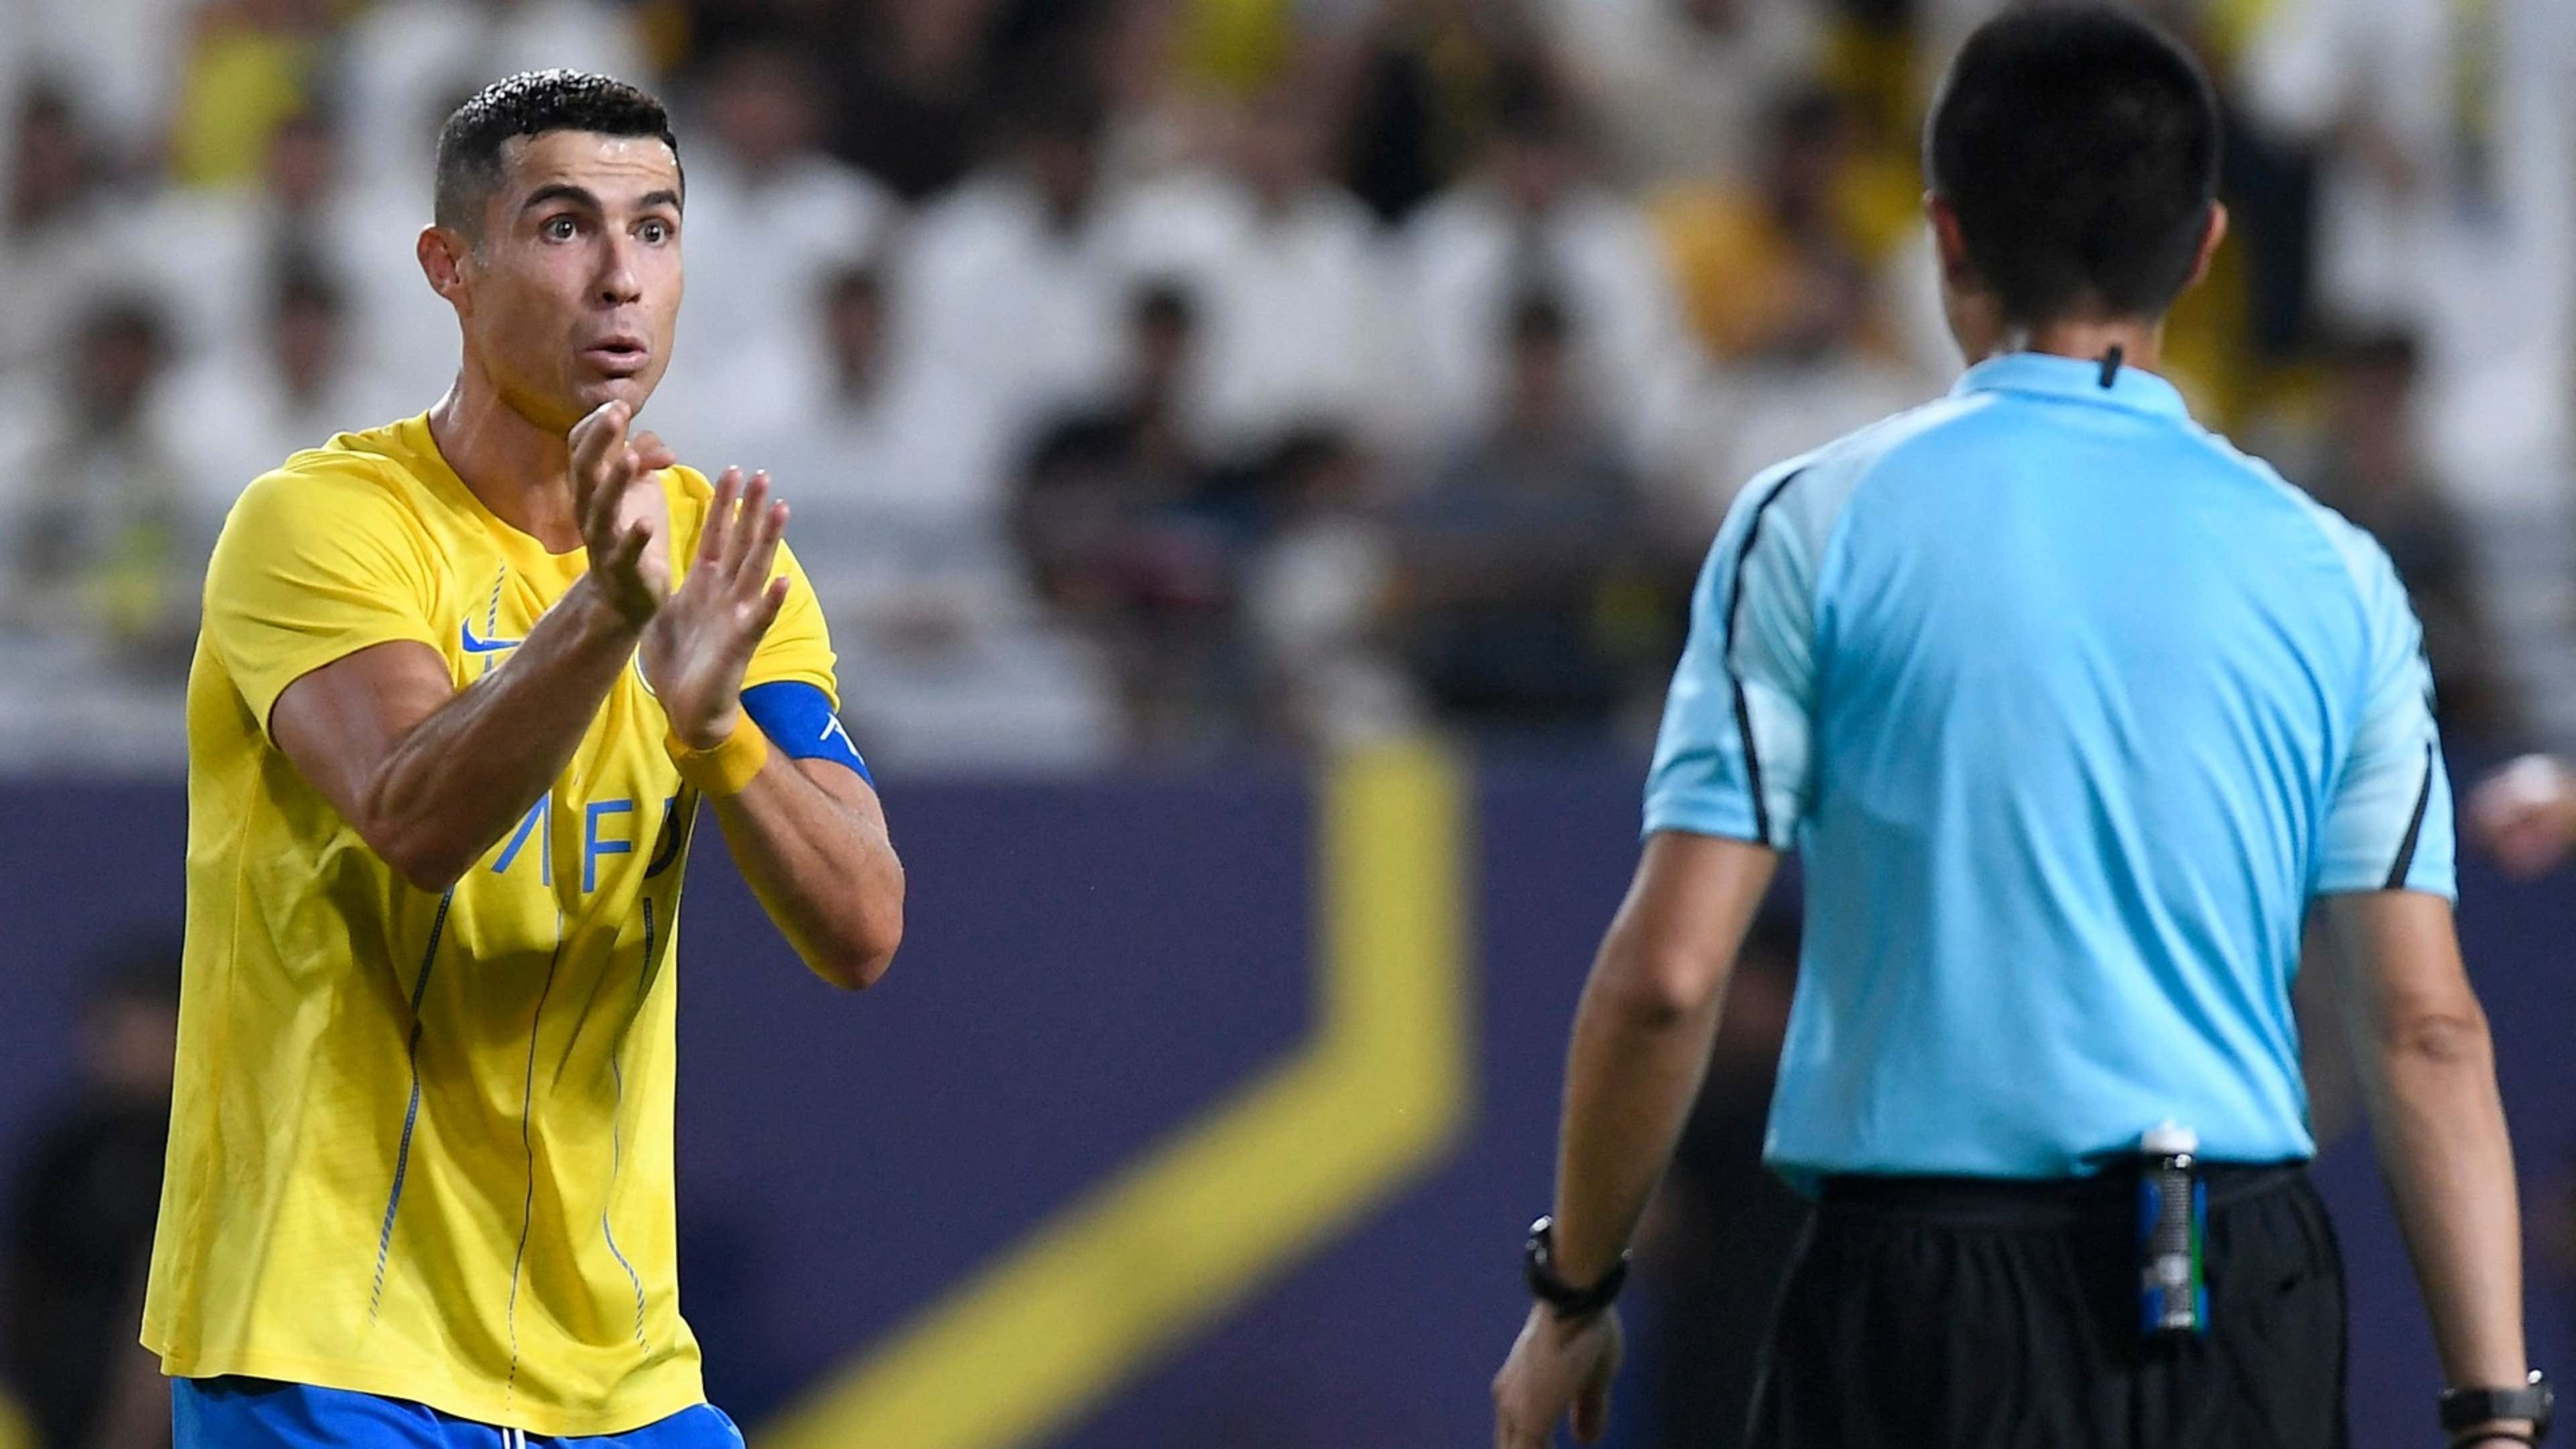 Ronaldo Talks Referee Out Of Awarding Penalty For Persepolis In AFC Champions League Game